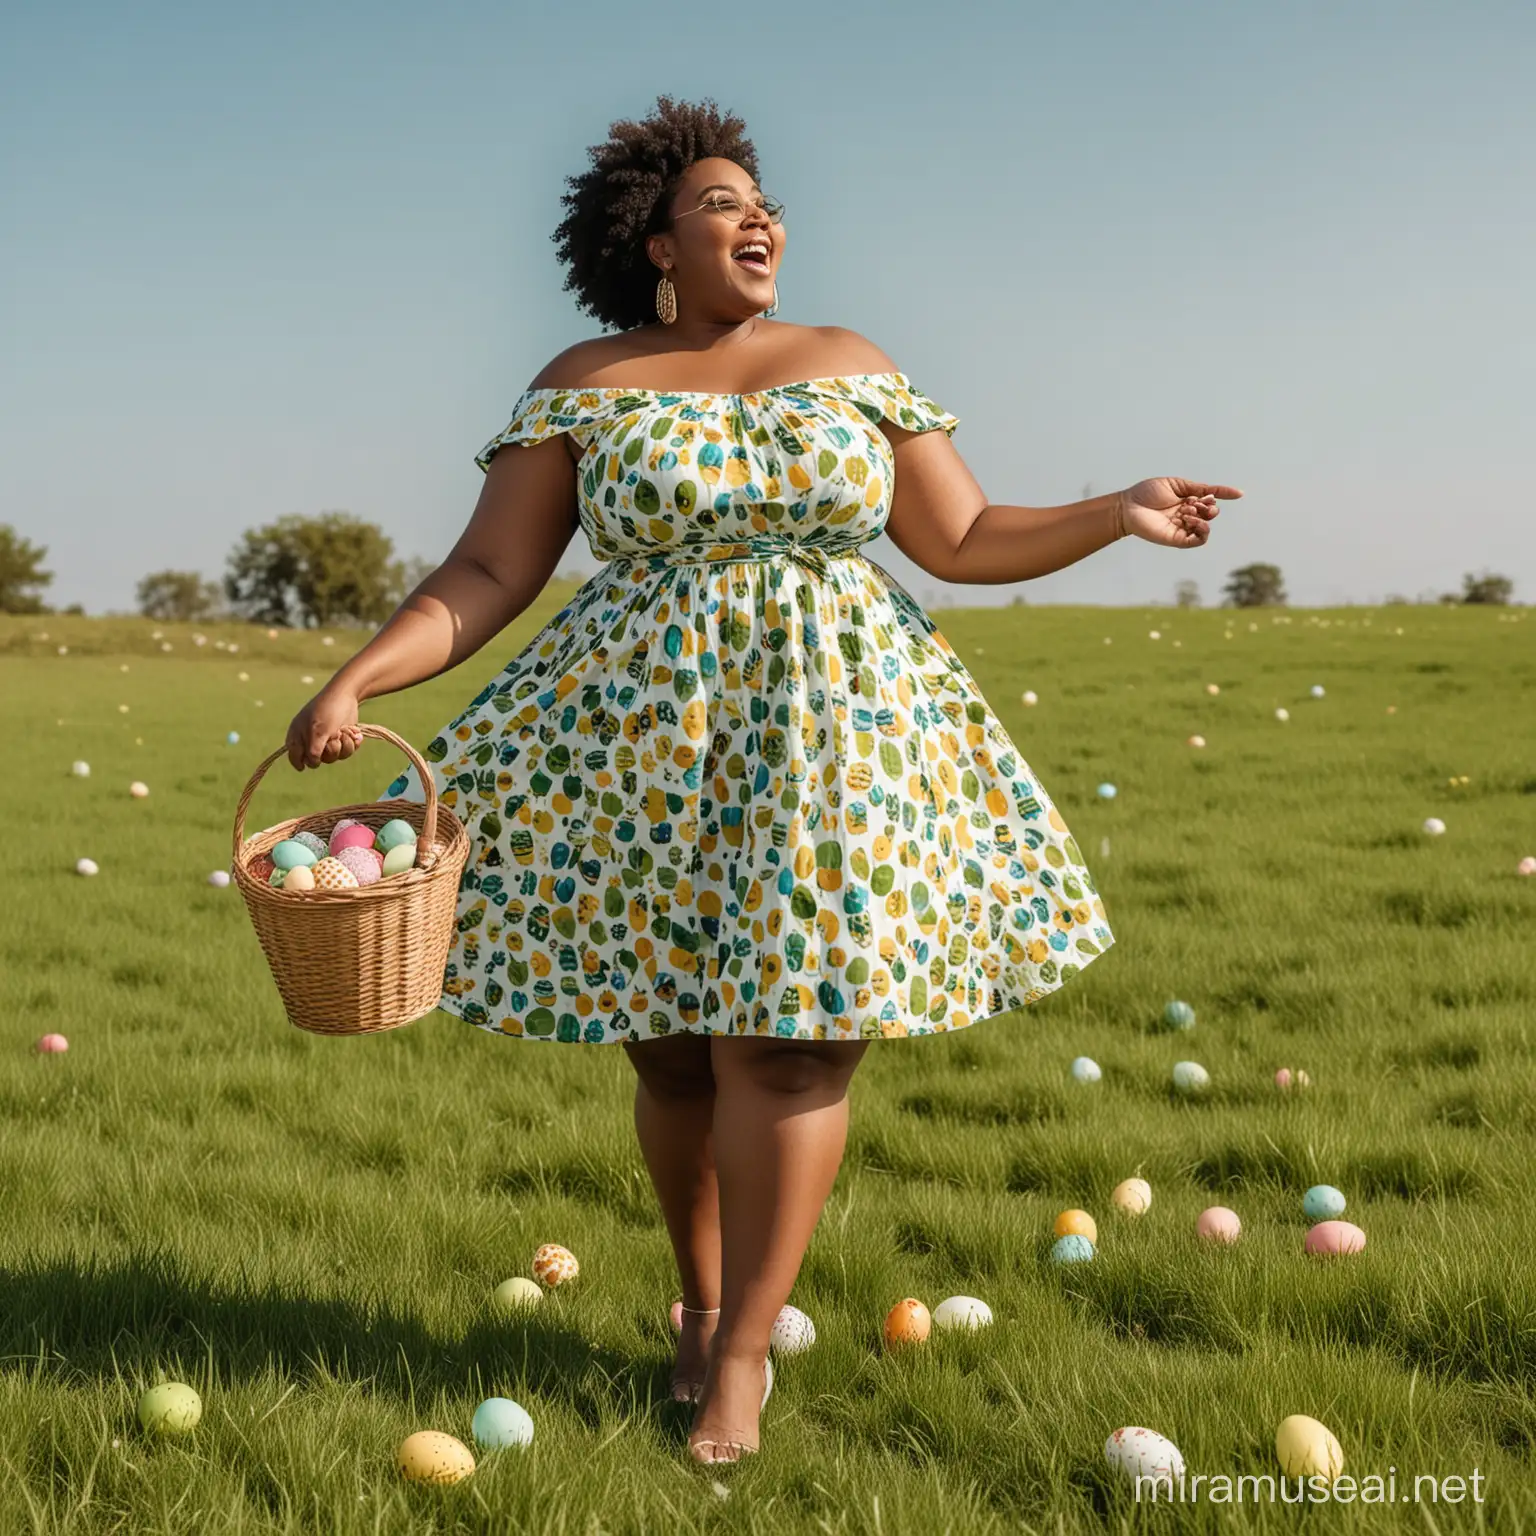 Gorgeous African plus size woman wearing a modern summer outfit,excited,holding Easter bucket,open field aesthetic background with very green grass,clear sky,Easter eggs scattered around,high quality,no errors 